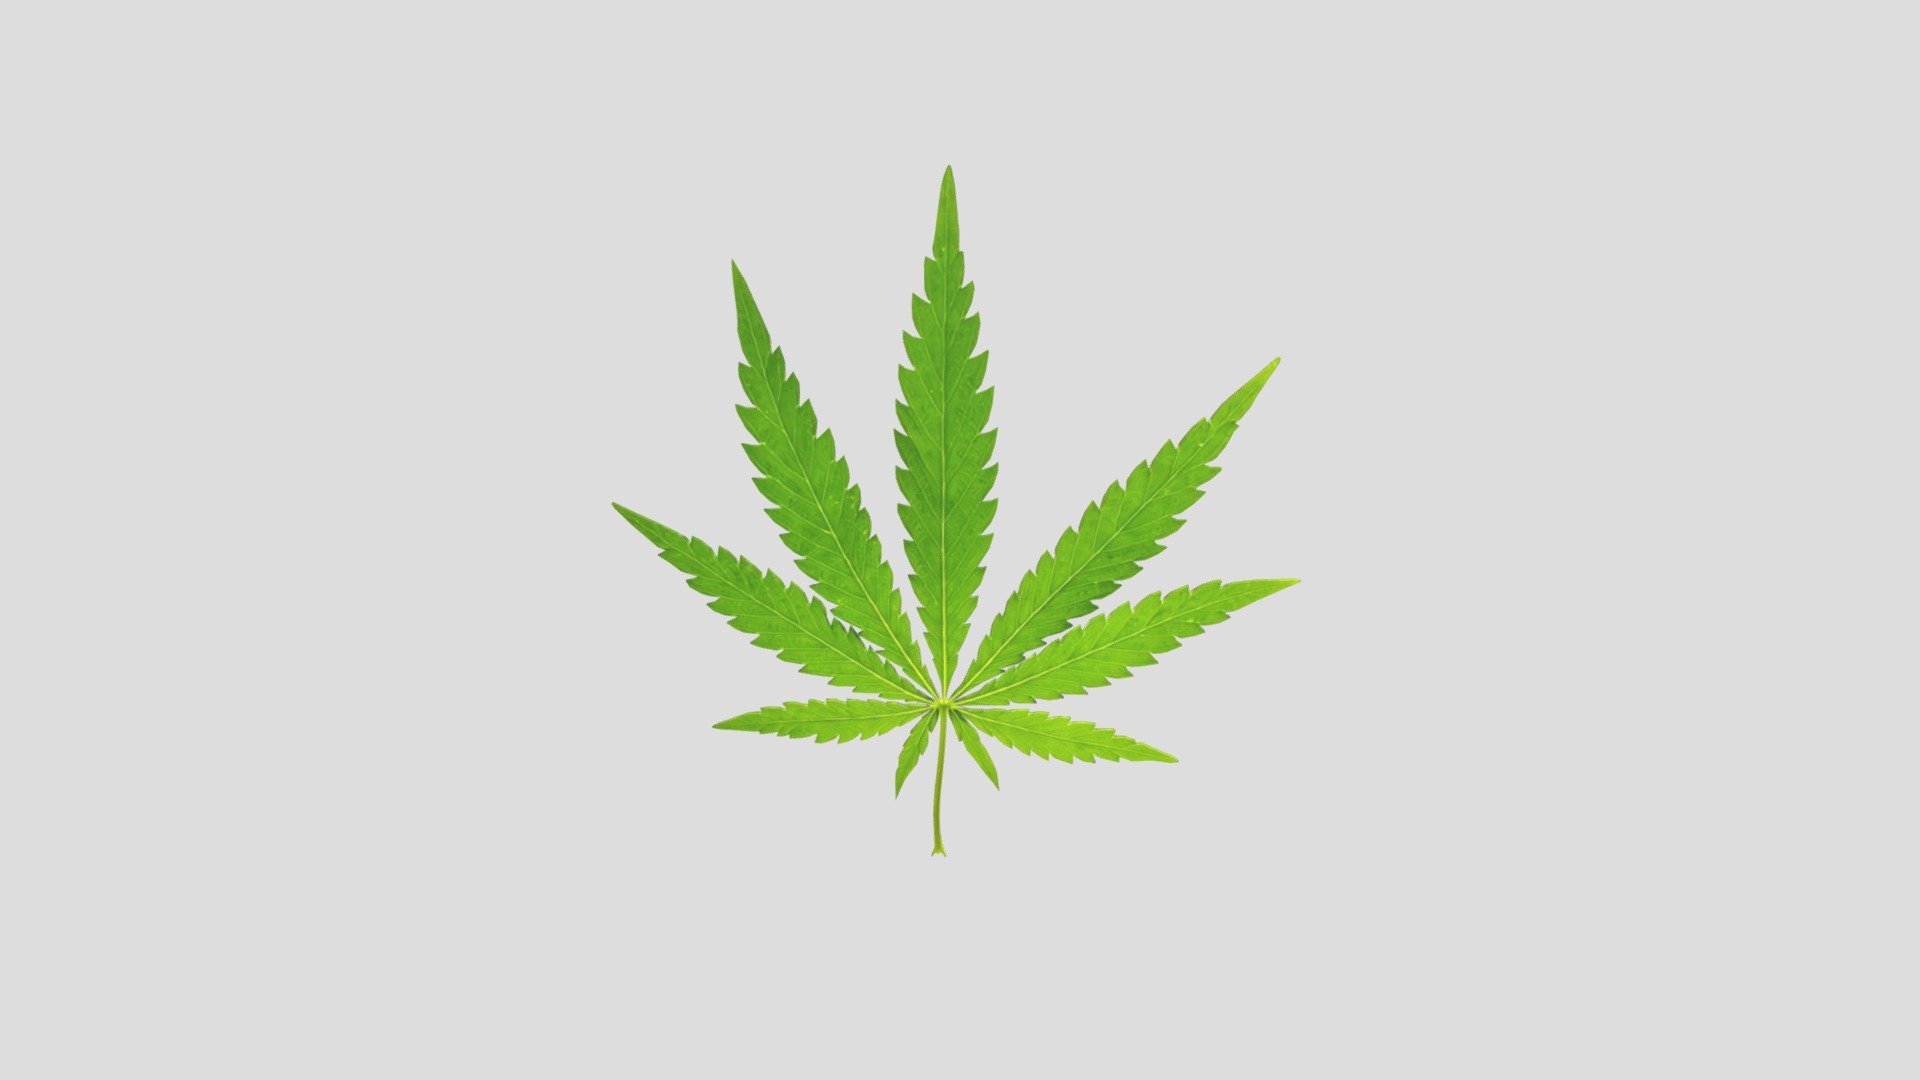 Textures: 1090 × 1120, Colors on texture: Green colors.

Has Normal Map: 1090 × 1120.

Materials: 1 - Cannabis Leaf Realistic

Flat shaded.

Non-Mirrored.

Subdivision Level: 0

Origin located on middle-center.

Polygons: 3236

Vertices: 1620

Formats: Fbx, Obj, Stl, Dae.

I hope you enjoy the model! - Cannabis Leaf Realistic - Buy Royalty Free 3D model by Ed+ (@EDplus) 3d model